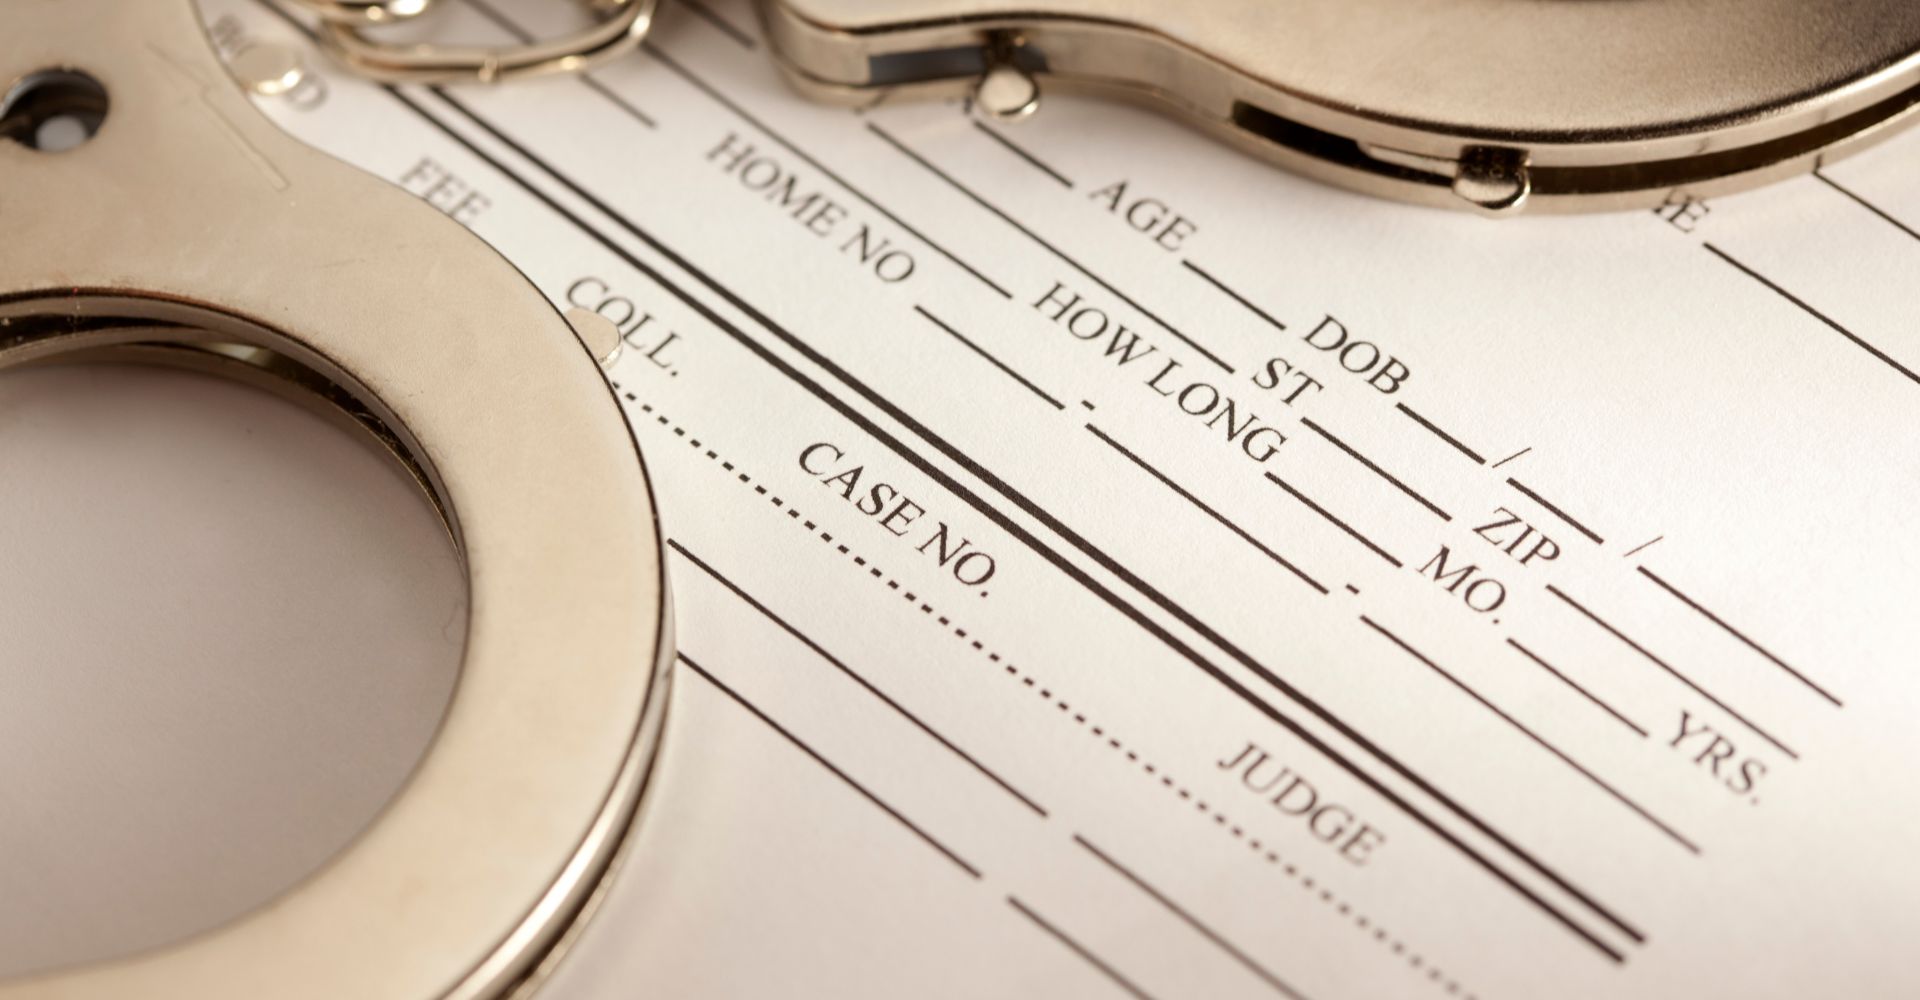 Handcuffs on a partially filled bail bond form.